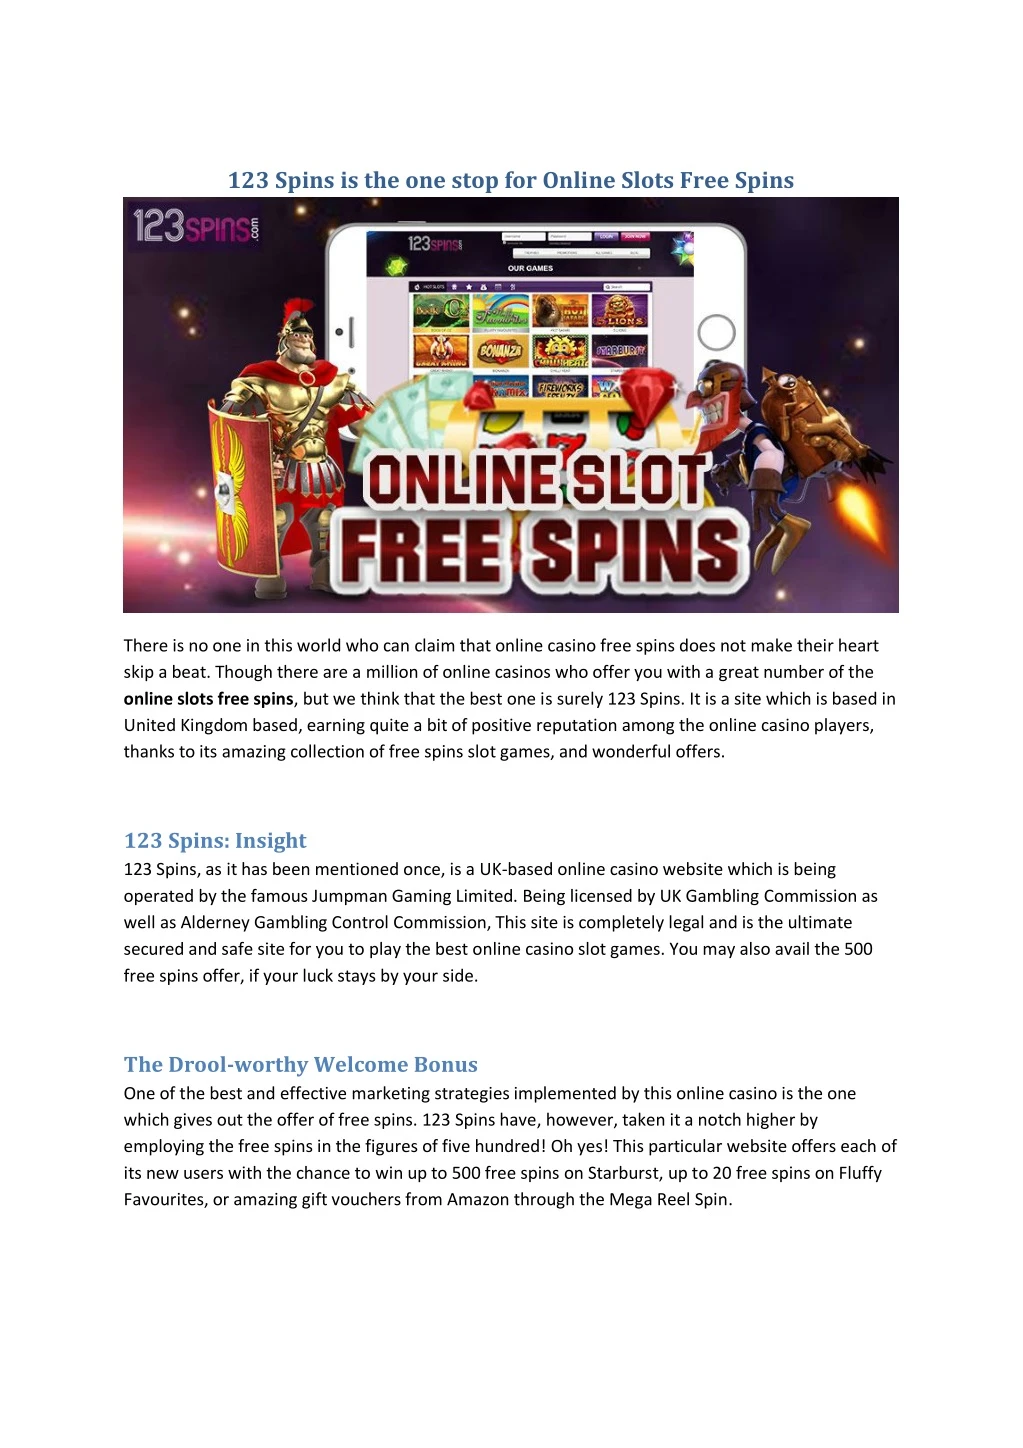 123 spins is the one stop for online slots free